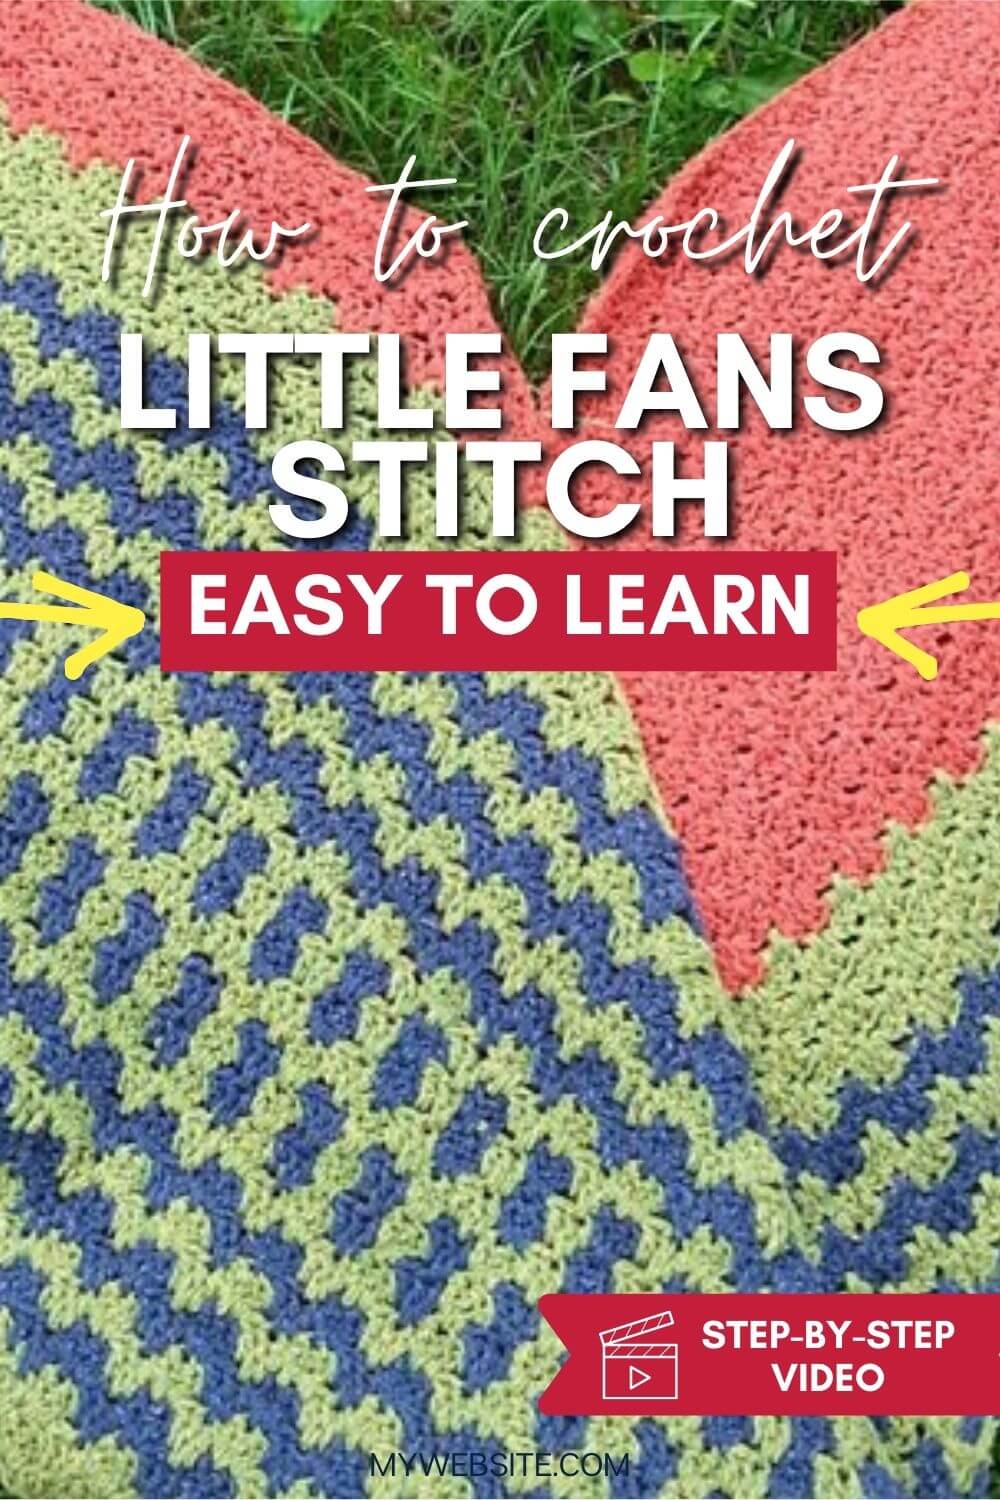 Little Fans Crochet Stitch Pattern Free Tutorial With Video, Chart, and Photos